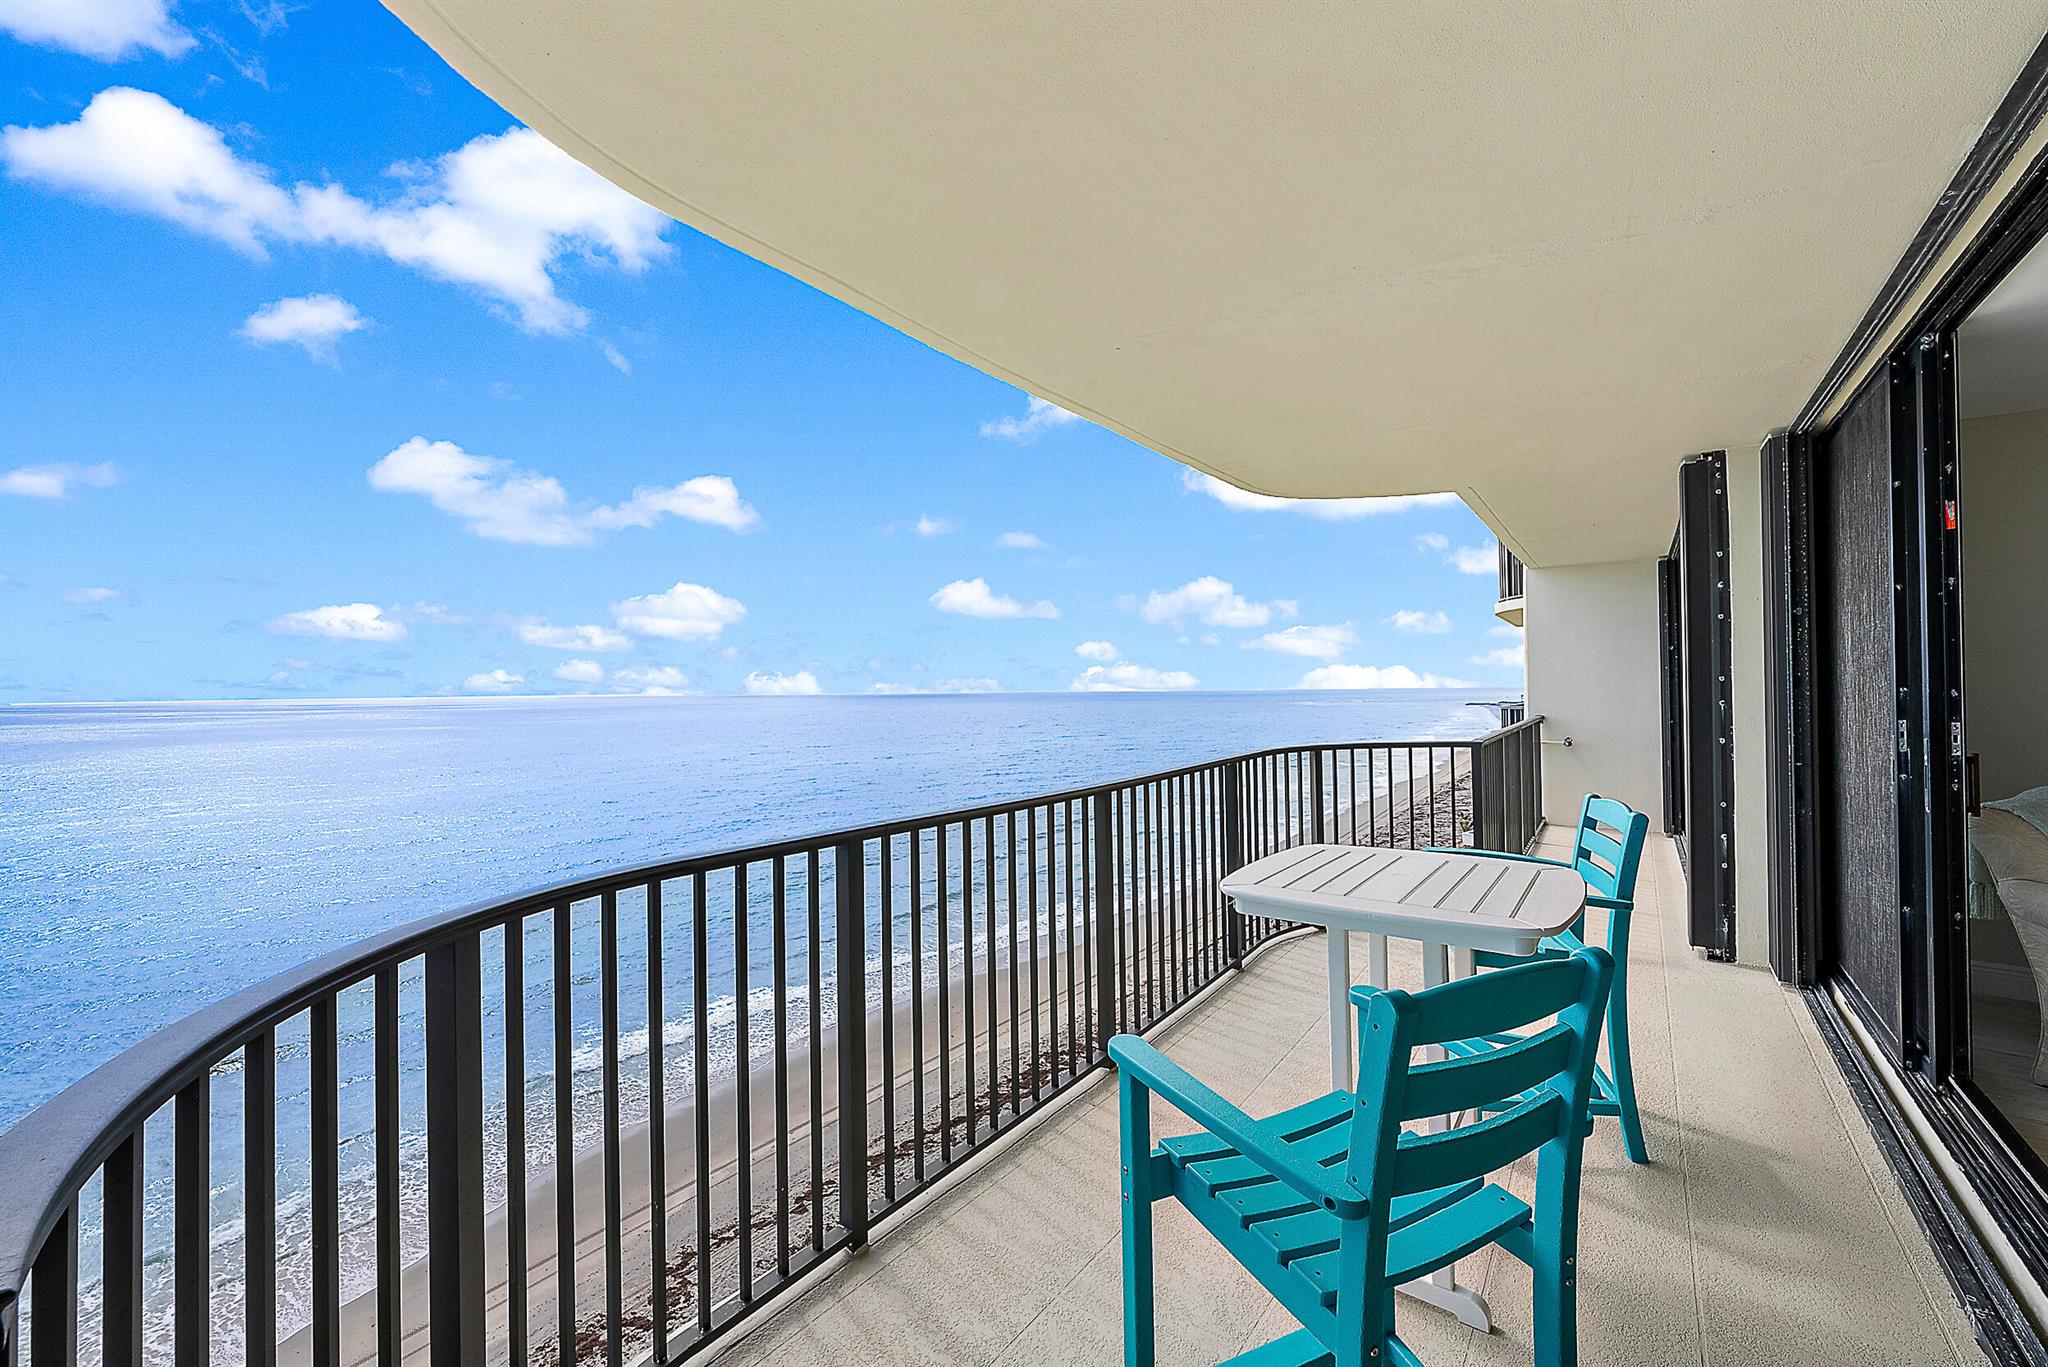 DIRECT OCEANFRONT & GORGEOUS INTRACOASTAL VIEWS-Wake up to the unparalleled & unobstructed turquoise blue ocean in this furnished light, bright and immaculate condo w/an open floor plan or watch the yachts go by on the Intracoastal! Gorgeous condo that is steps from the ocean. This meticulously maintained slice of Heaven has new porcelain flooring, neutral granite countertops, shaker cabinets and plantation shutters. Building has been renovated with a new(er) roof 2022, renovated lobby, edge pool and clubhouse which has an elevator to 2nd story fitness facility overlooking the ocean, building GENERATOR, sprinkler sys. Also has private beach access, very large storage lockers, a private car wash for residents only and